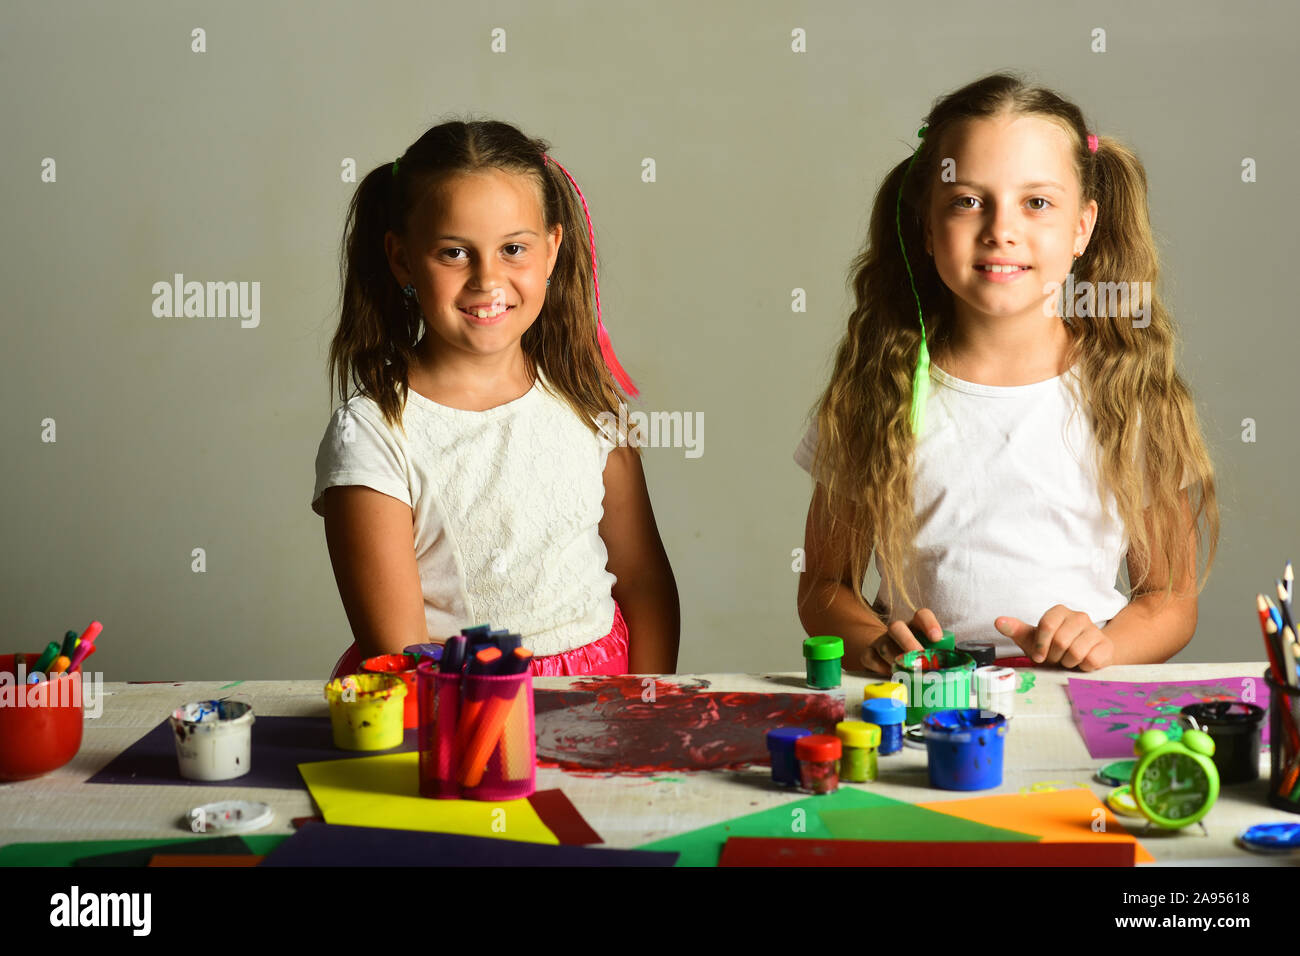 Girls With Smiling Faces By Their Art Desk Children Paint With